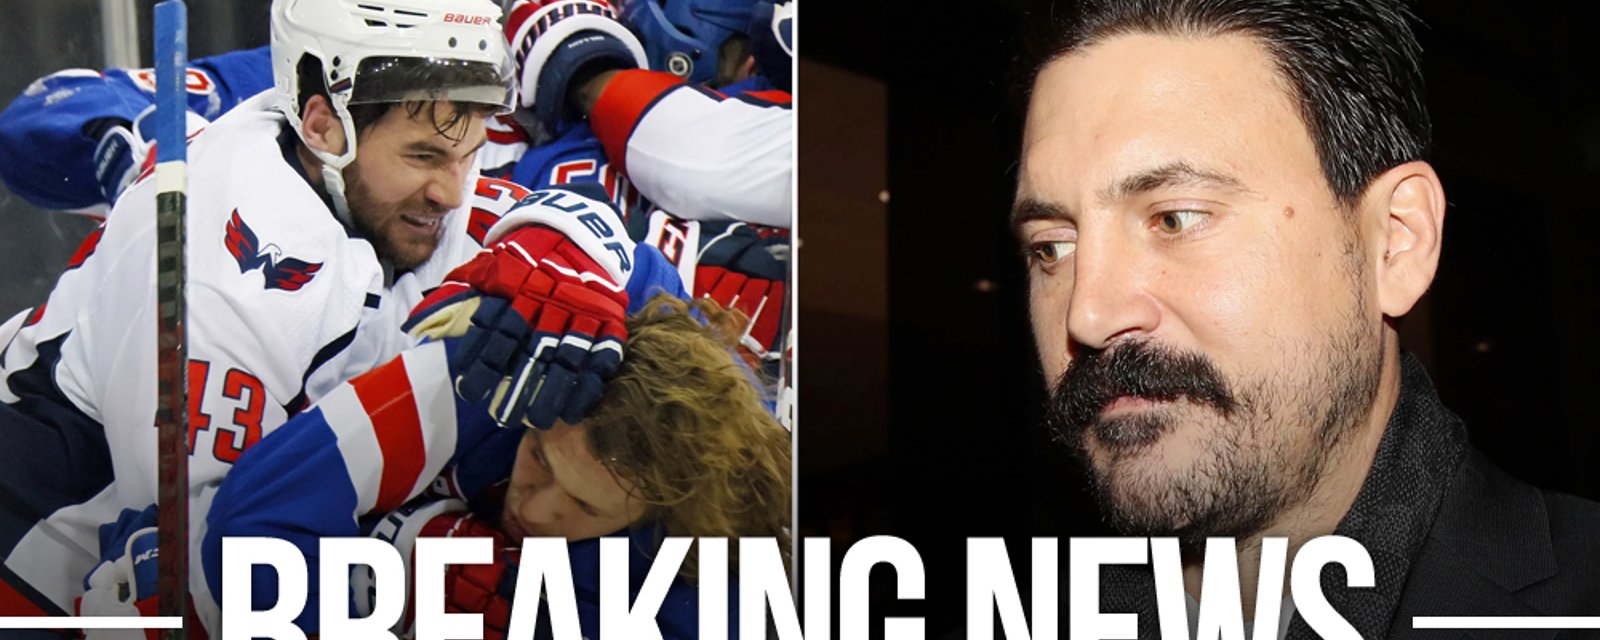 Rangers fined $250,000 for statement against George Parros